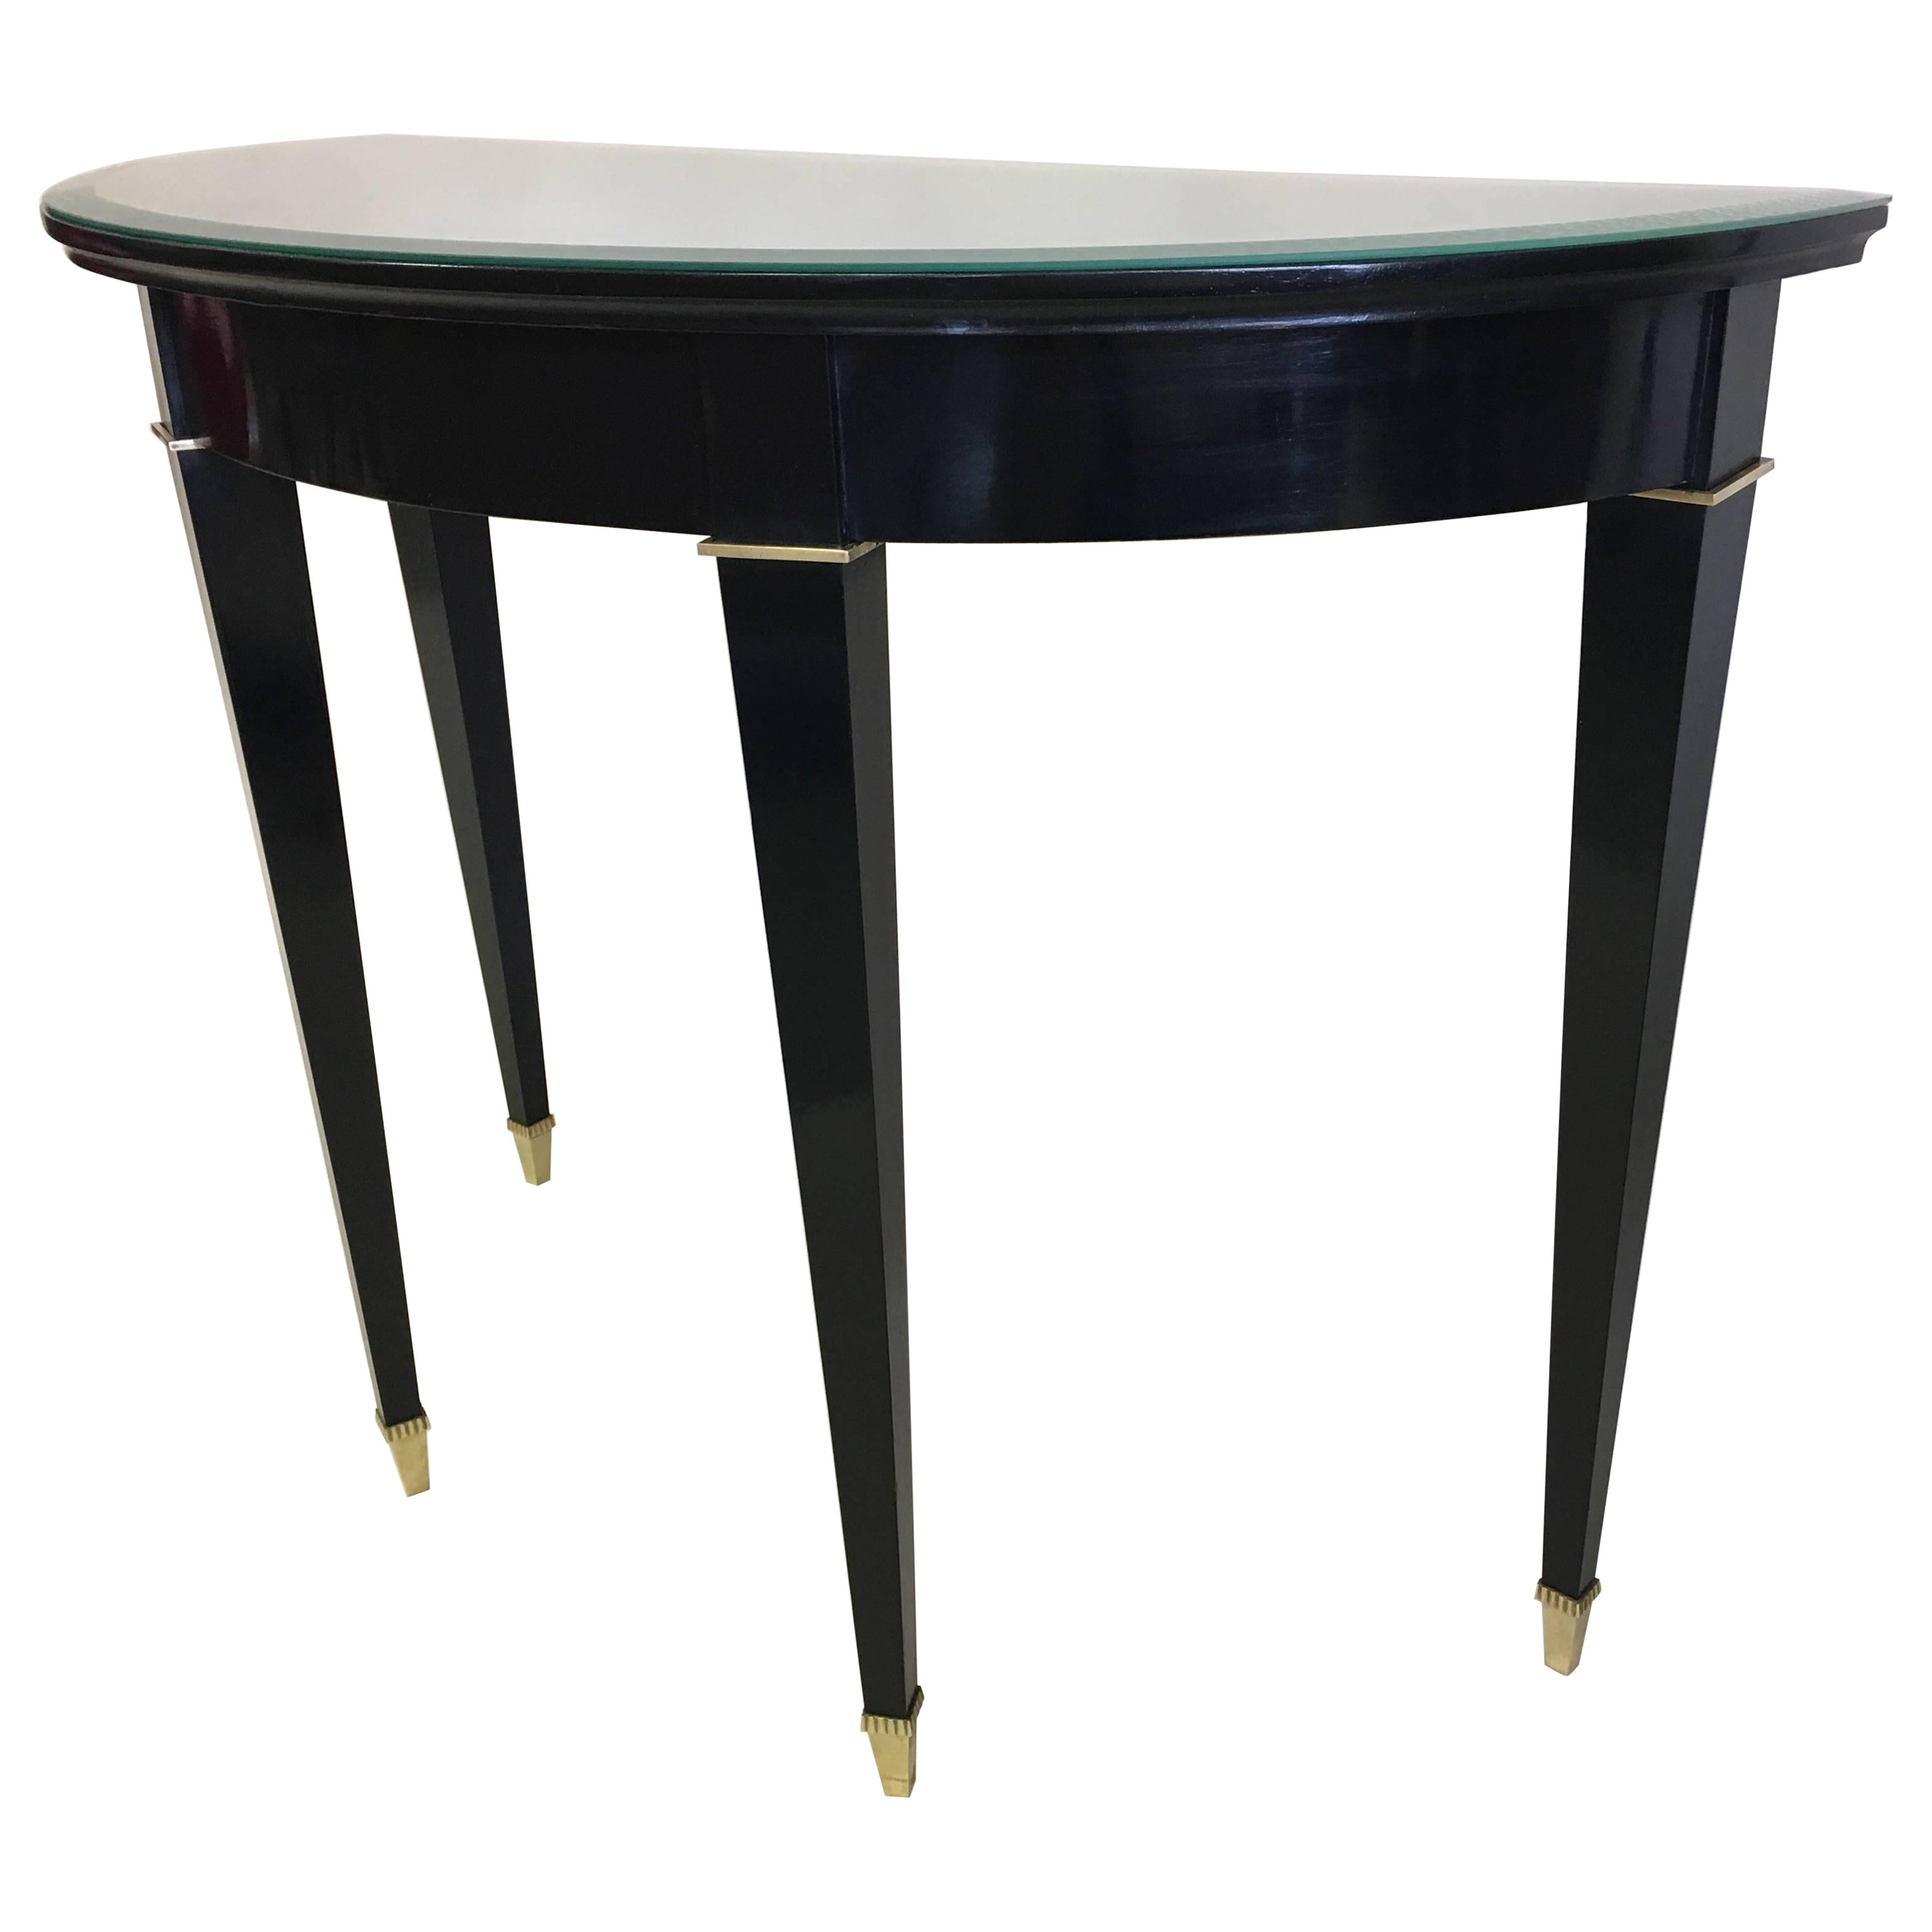 French Modern Neoclassical Black Lacquer Demilune Console Attr. to Andre Arbus